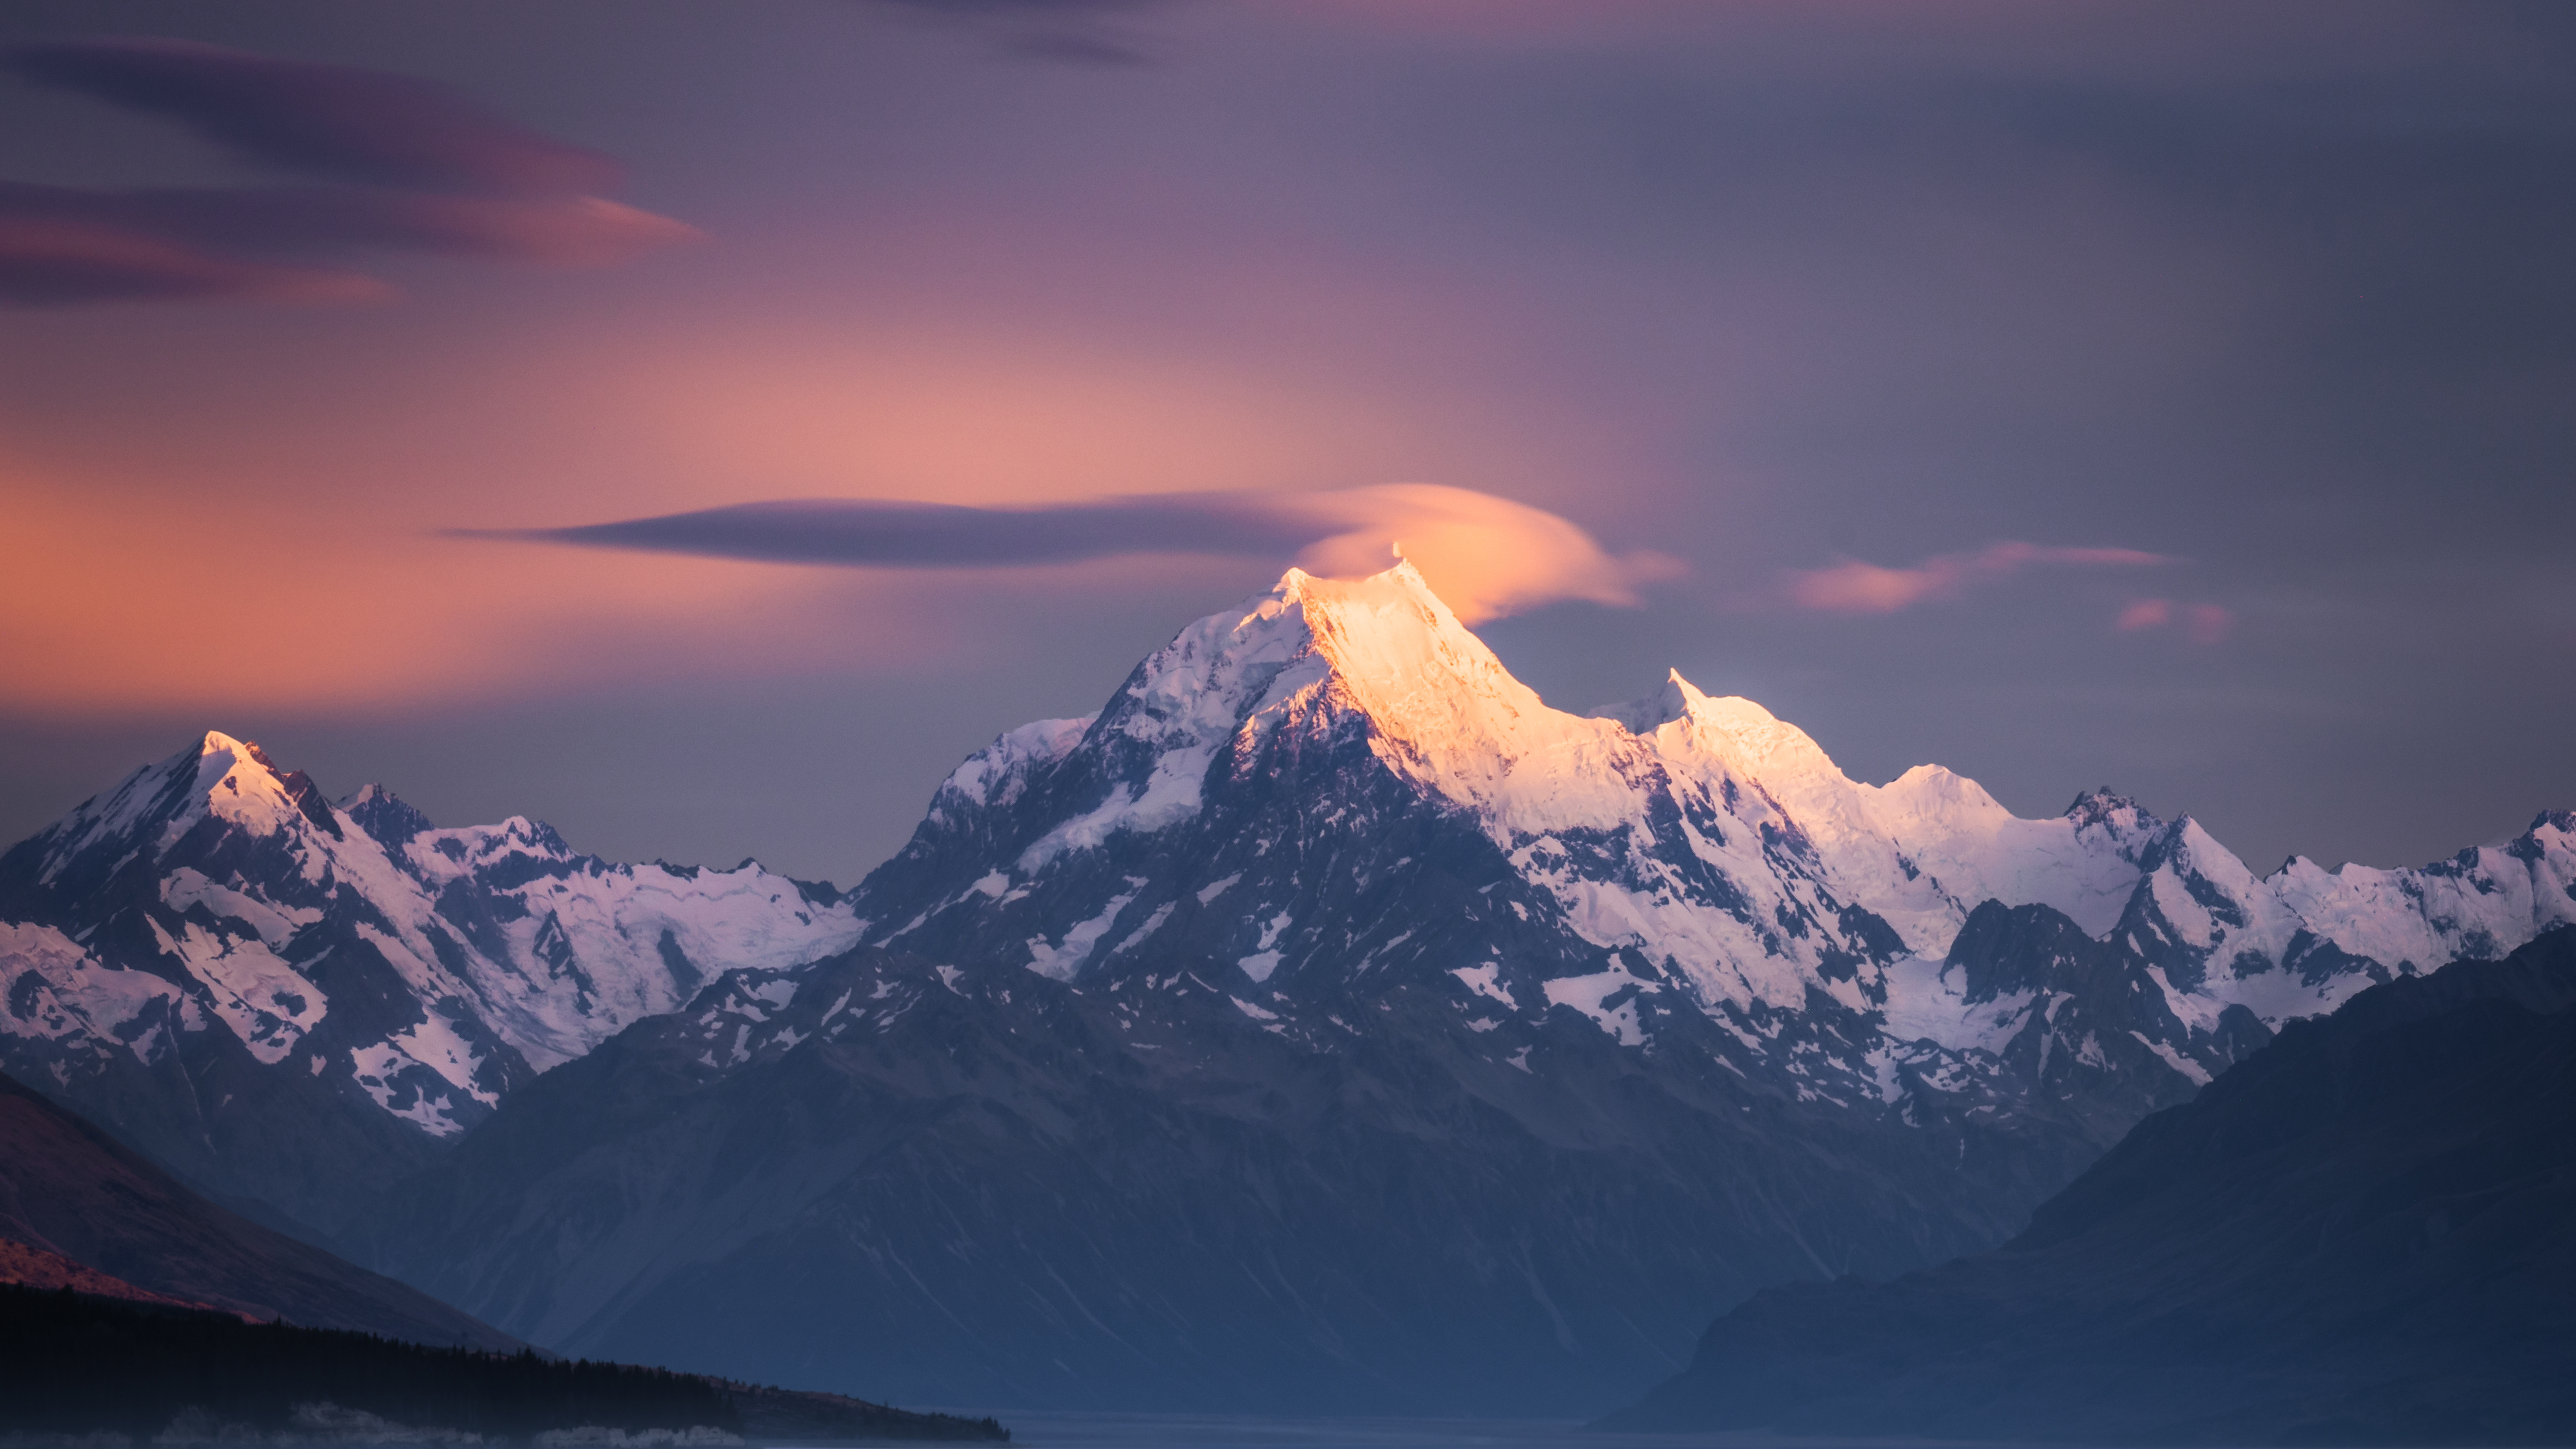 Landscape Nature Photography Mountains Sky Mount Cook New Zealand Snow Peak Clouds Sunset 5120x2880